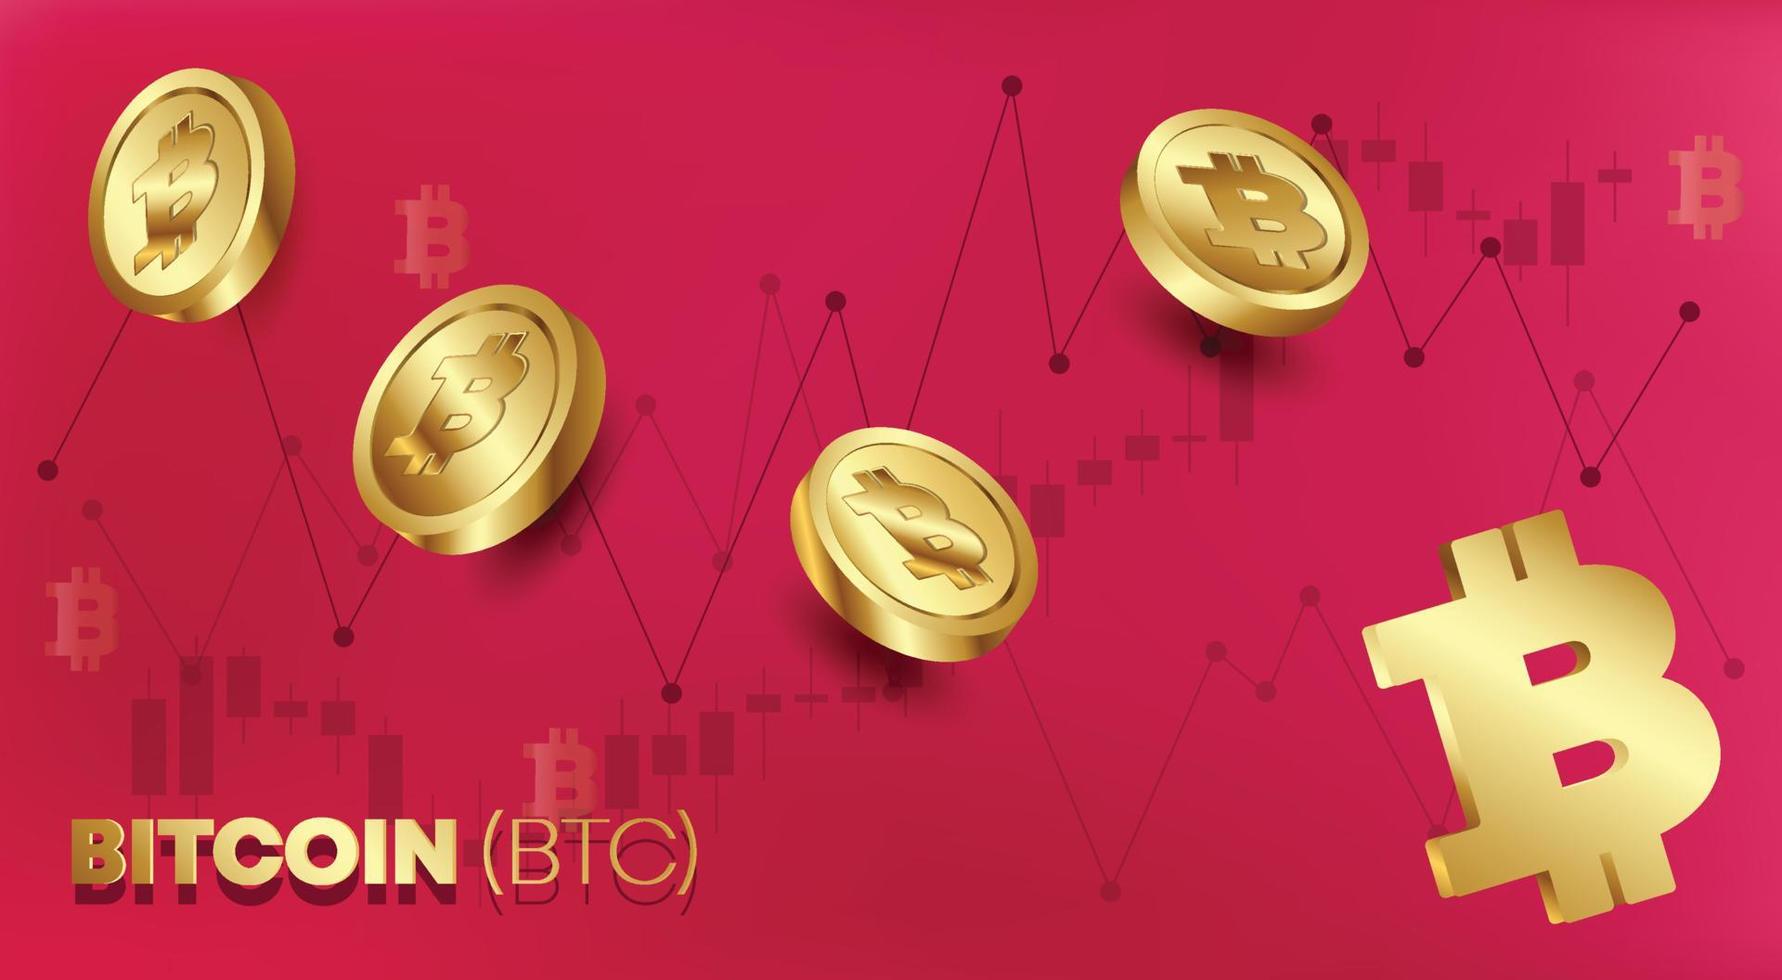 Bitcoin BTC golden coins with financial market graphics background free vector illustration